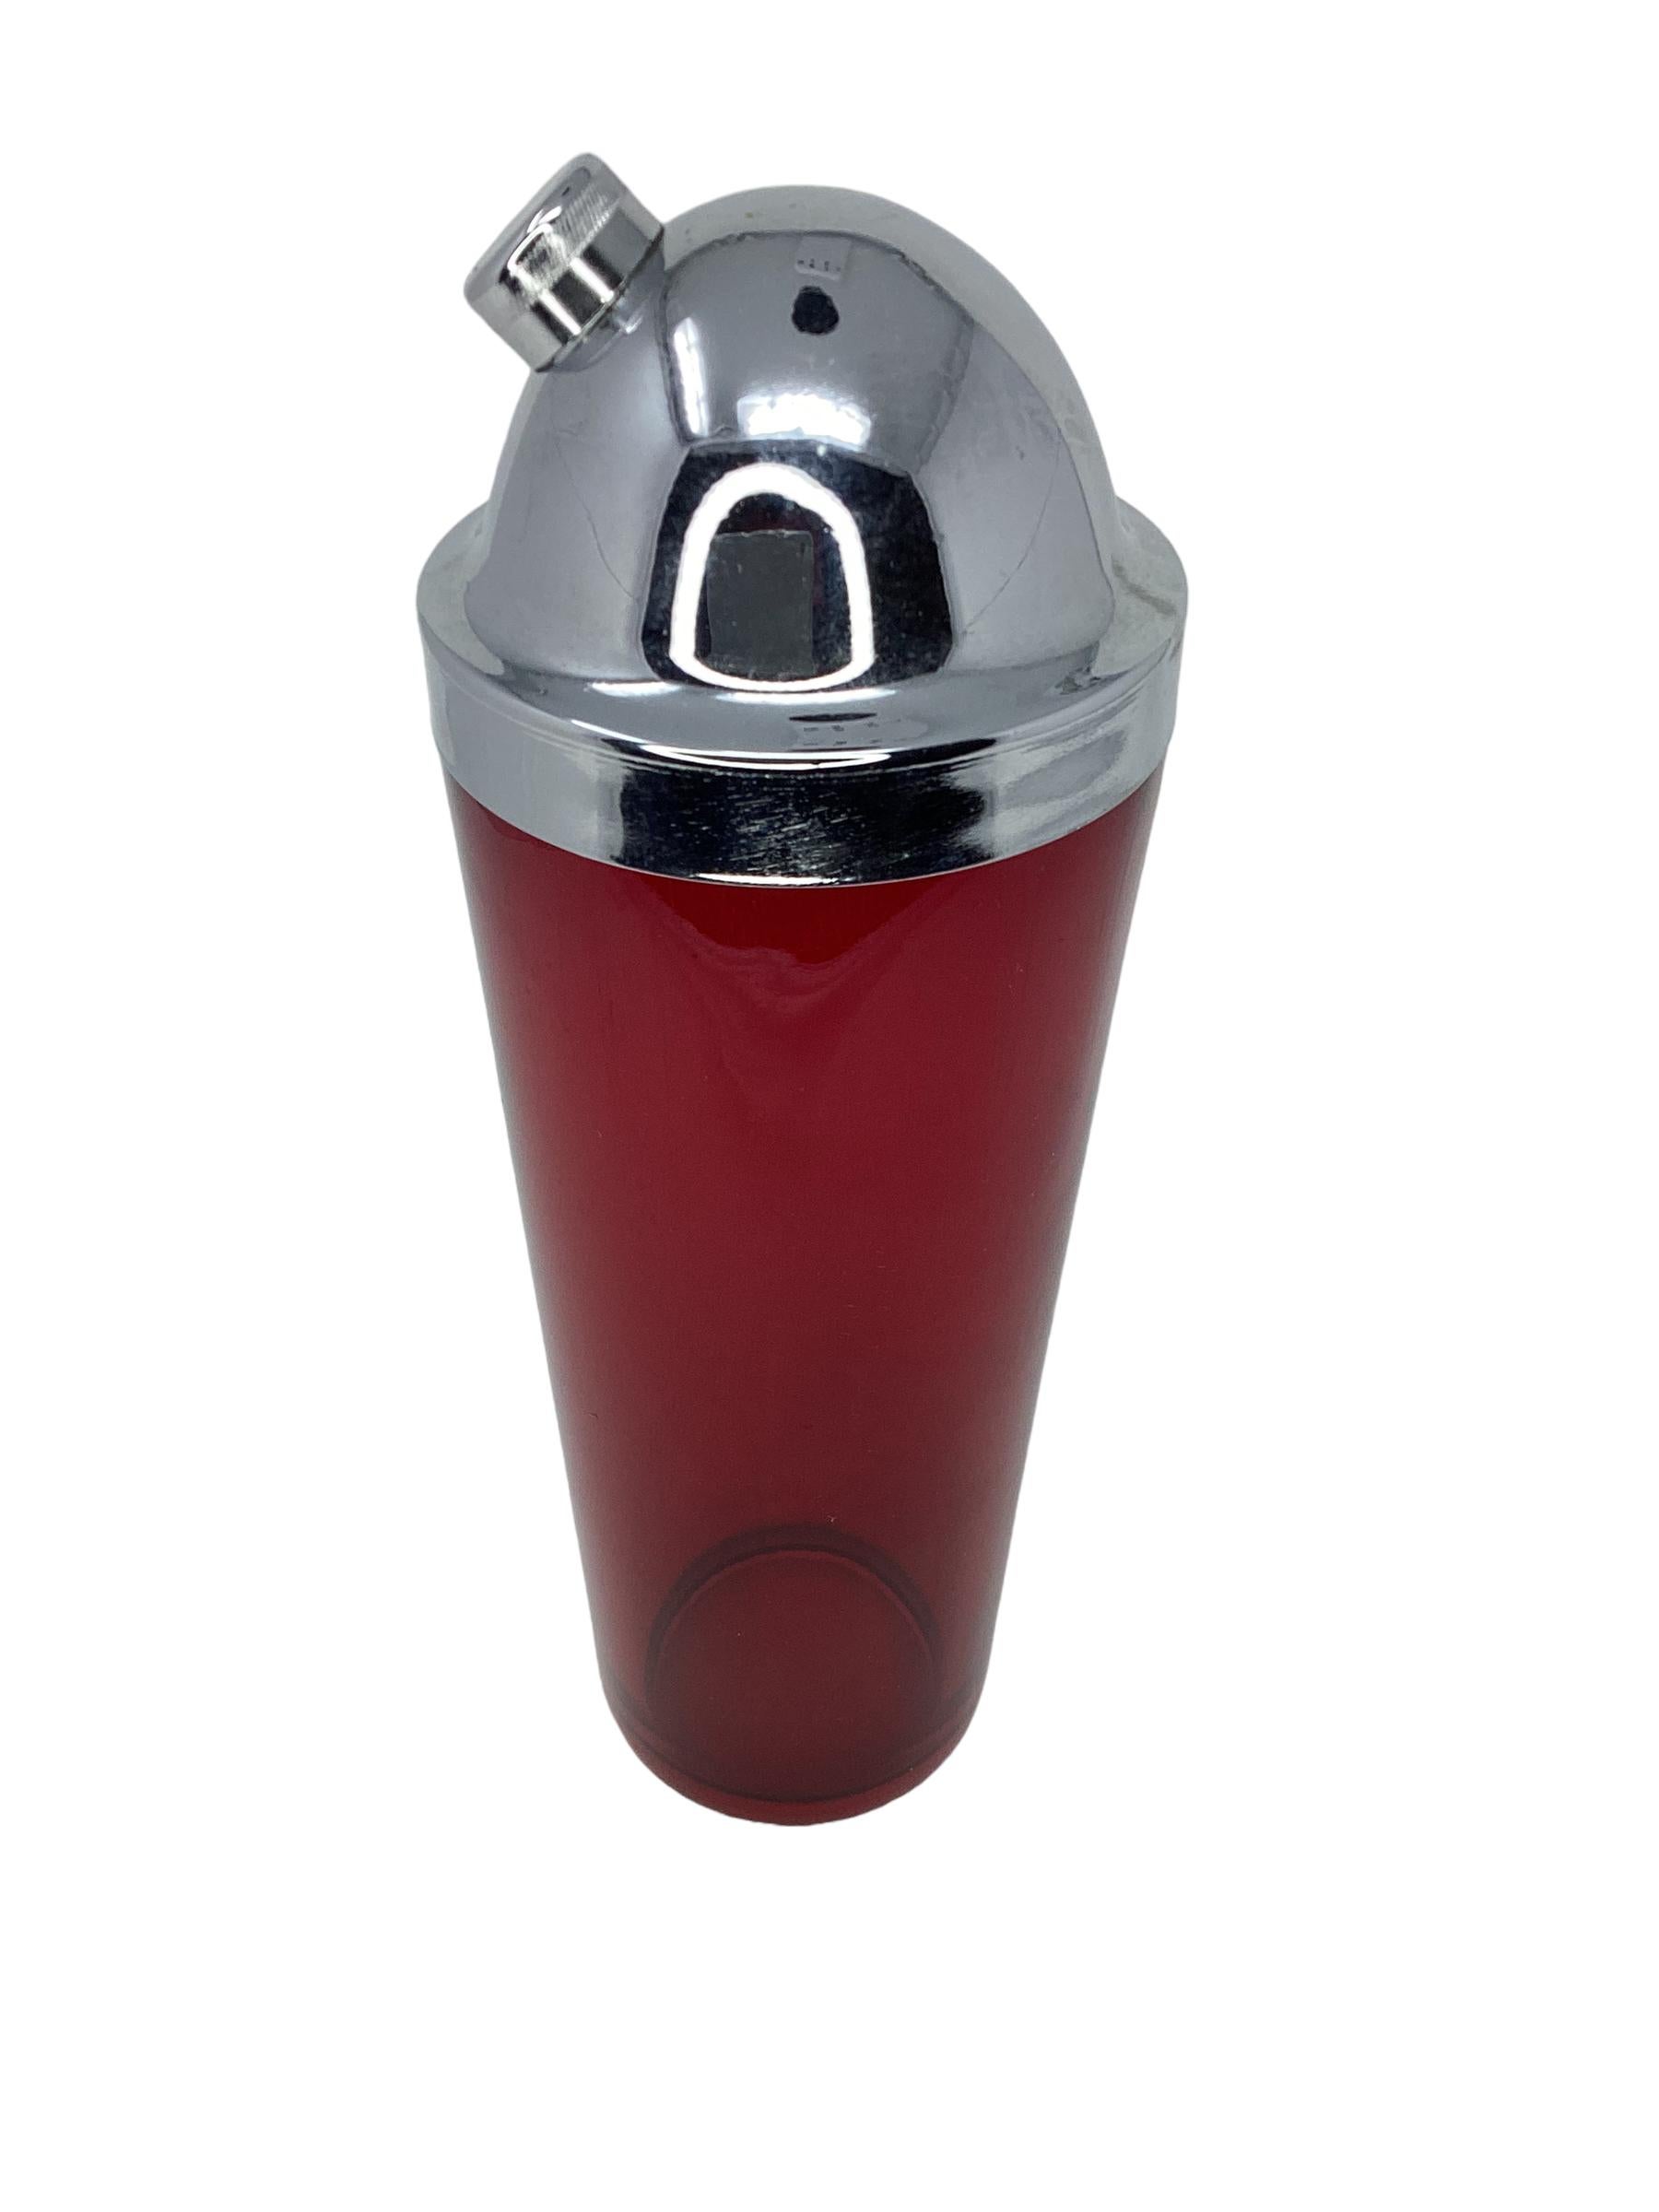 Large Art Deco Ruby Red Cocktail Shaker with domed chrome lid. Vibrant ruby red color makes this a statement piece for any bar.